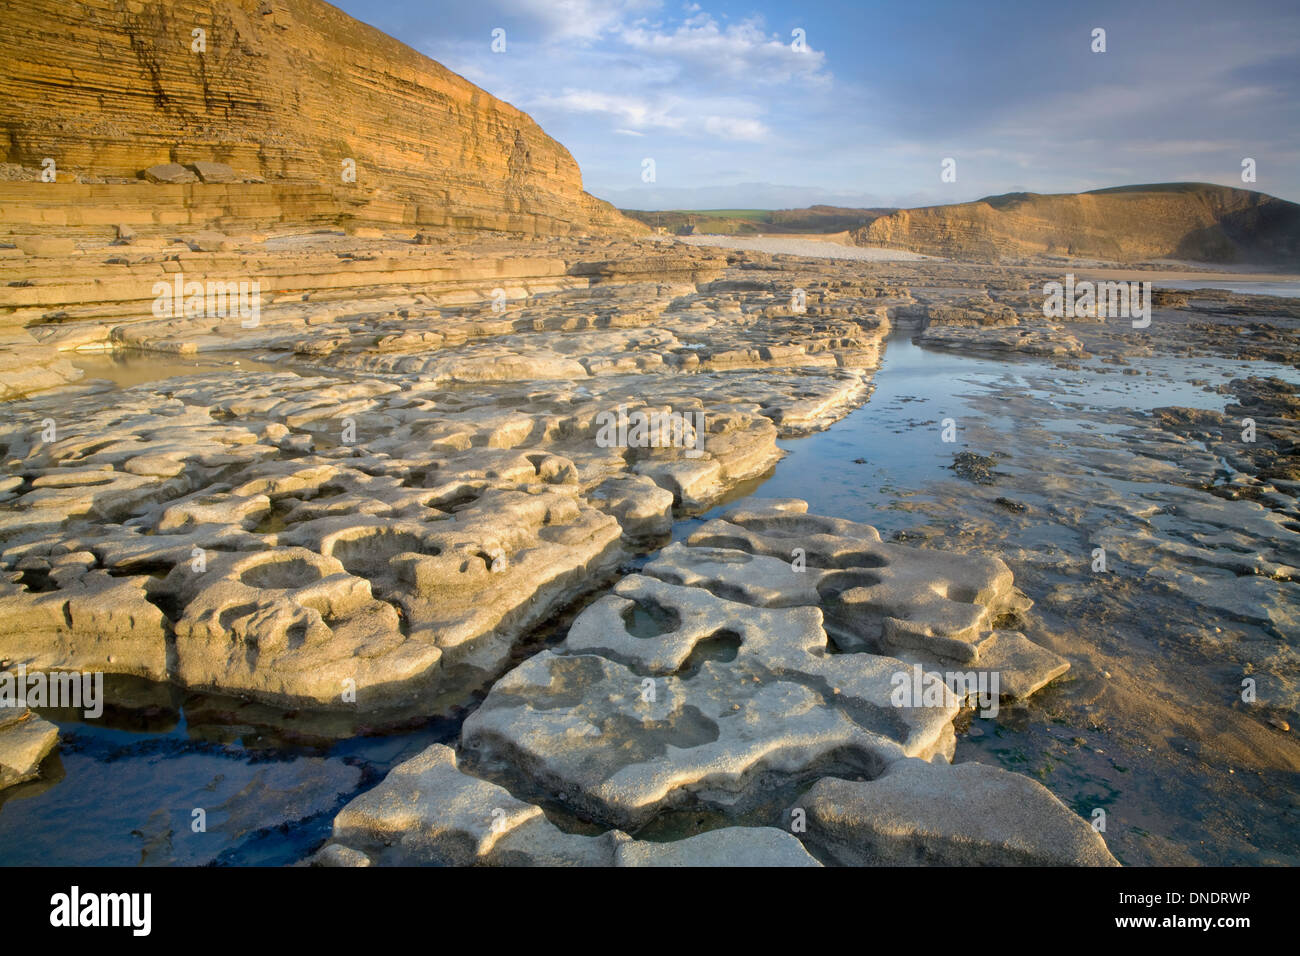 Rock formations at Dunraven Bay, South Wales, are caused by the power of the sea. The setting sun lights up the headland cliffs. Stock Photo